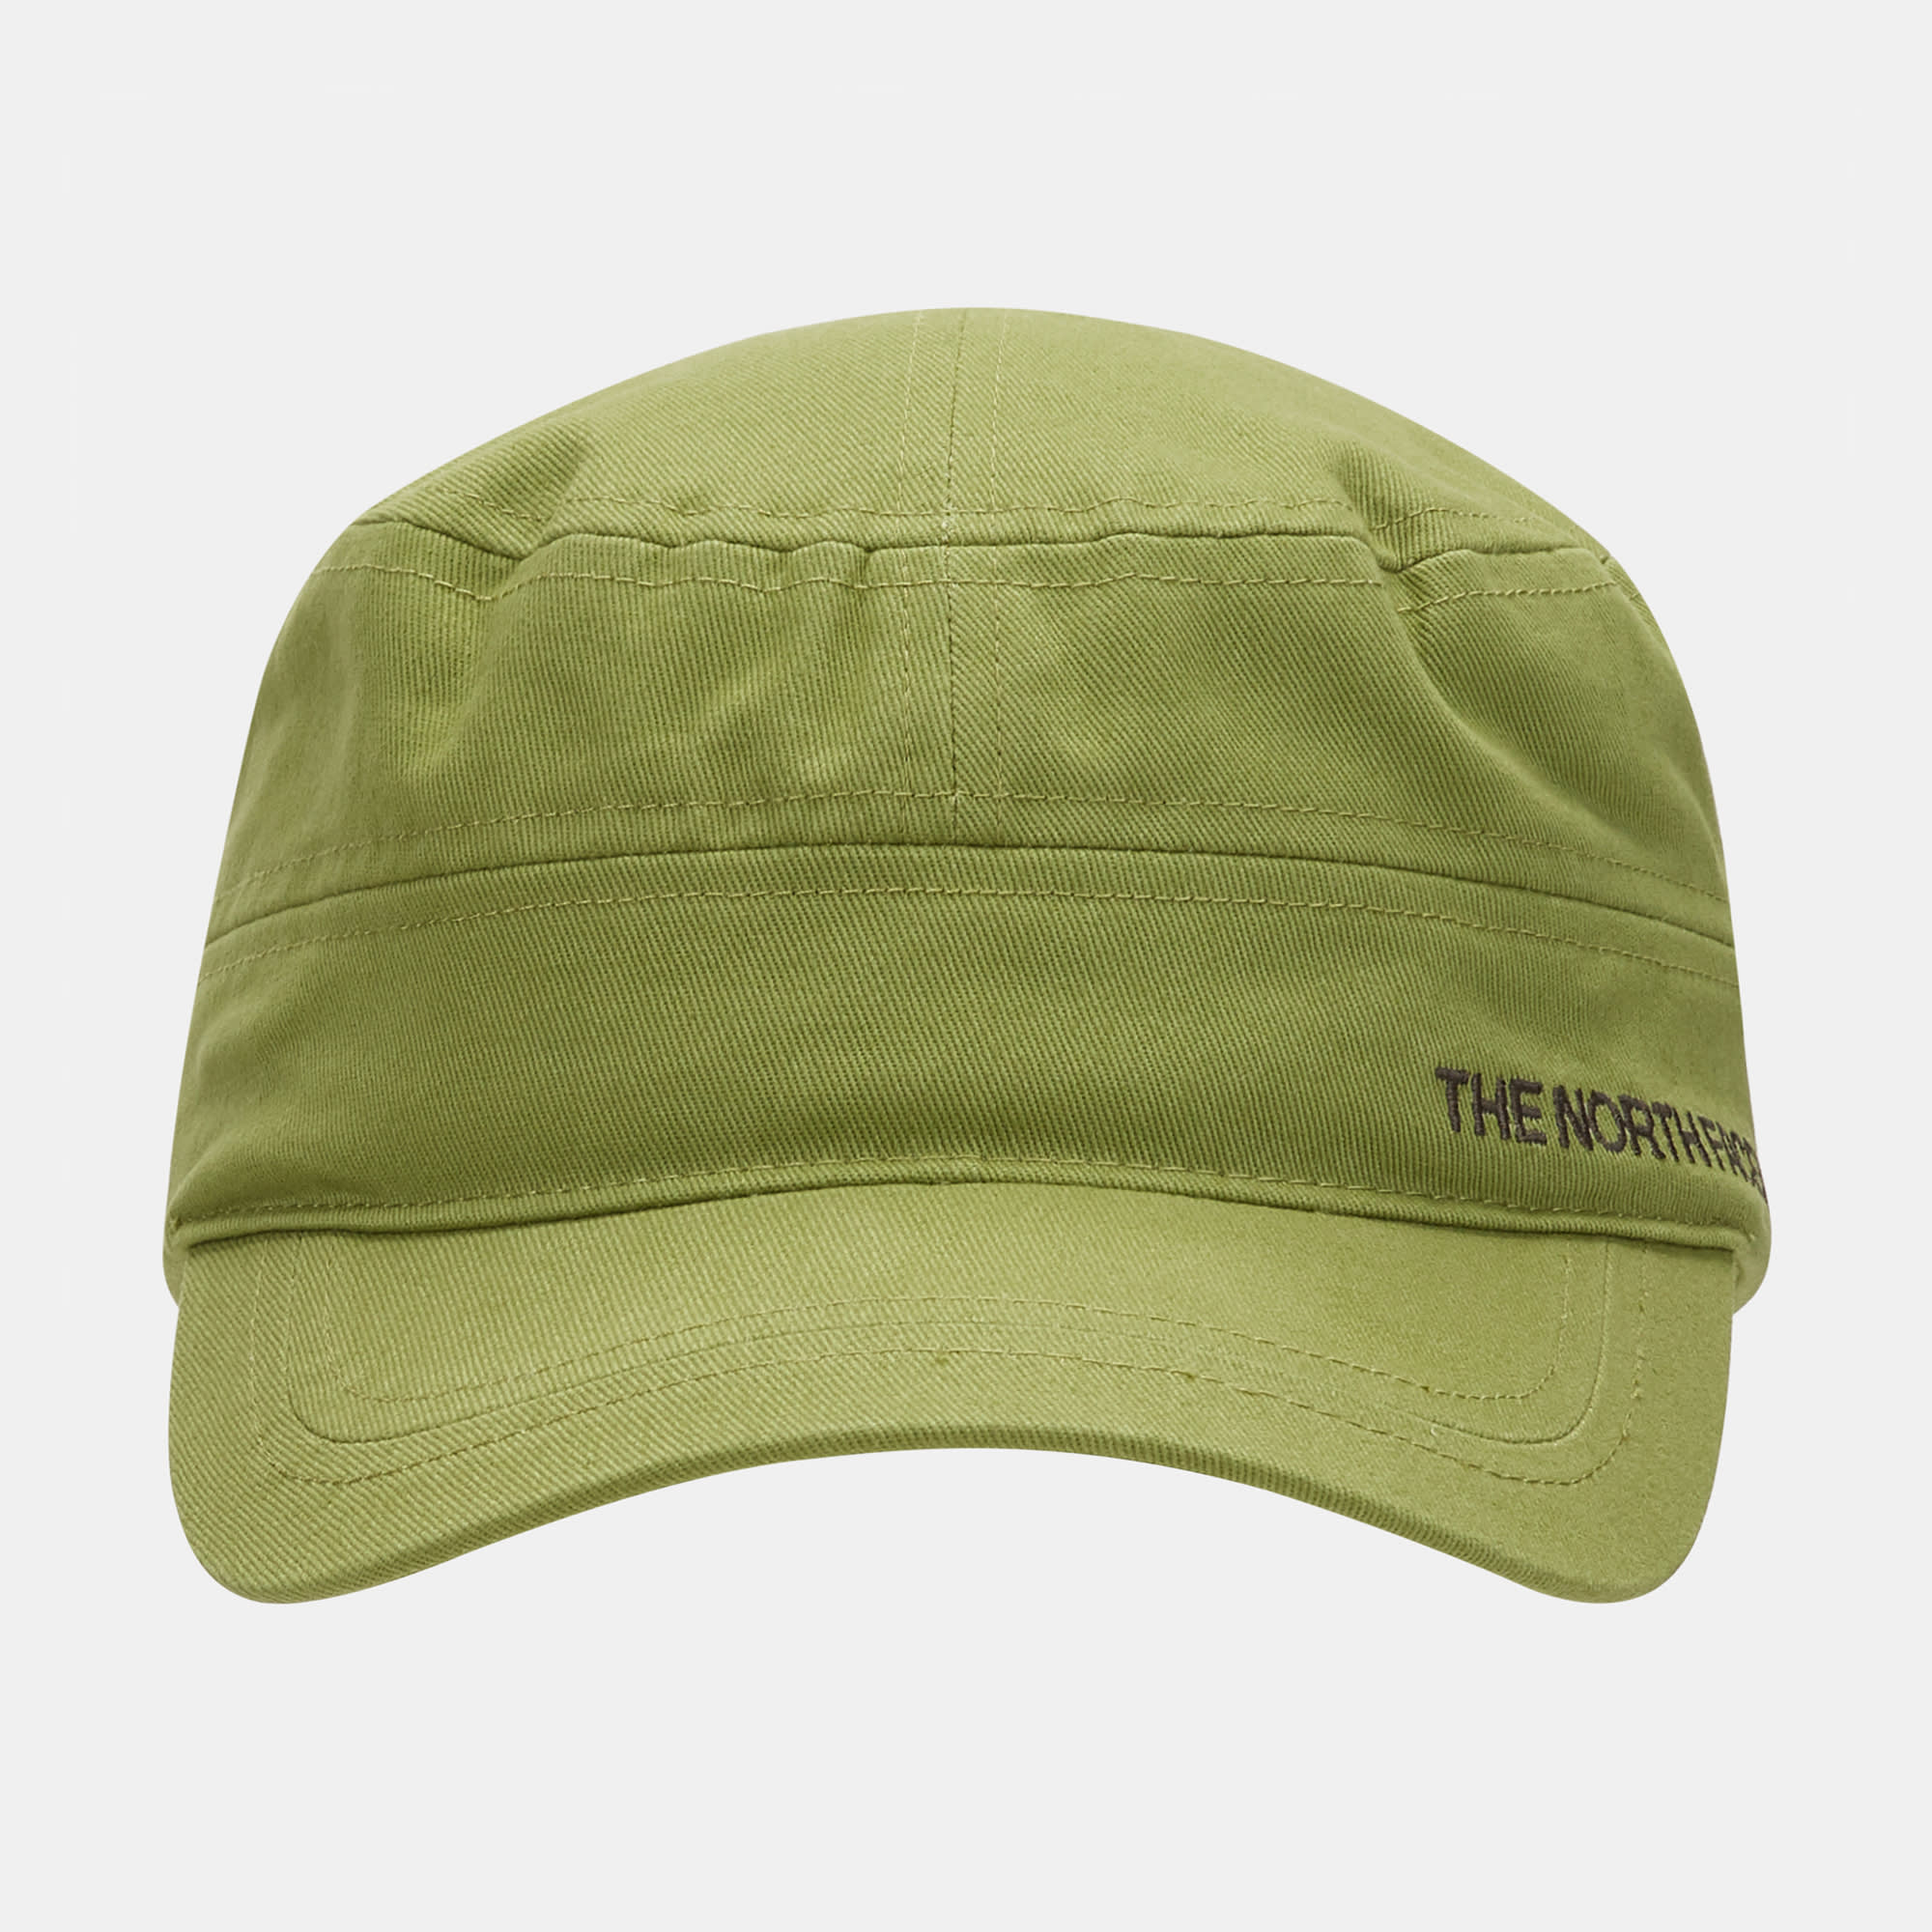 Shop Green The North Face Logo Military Cap for Unisex by The North ...